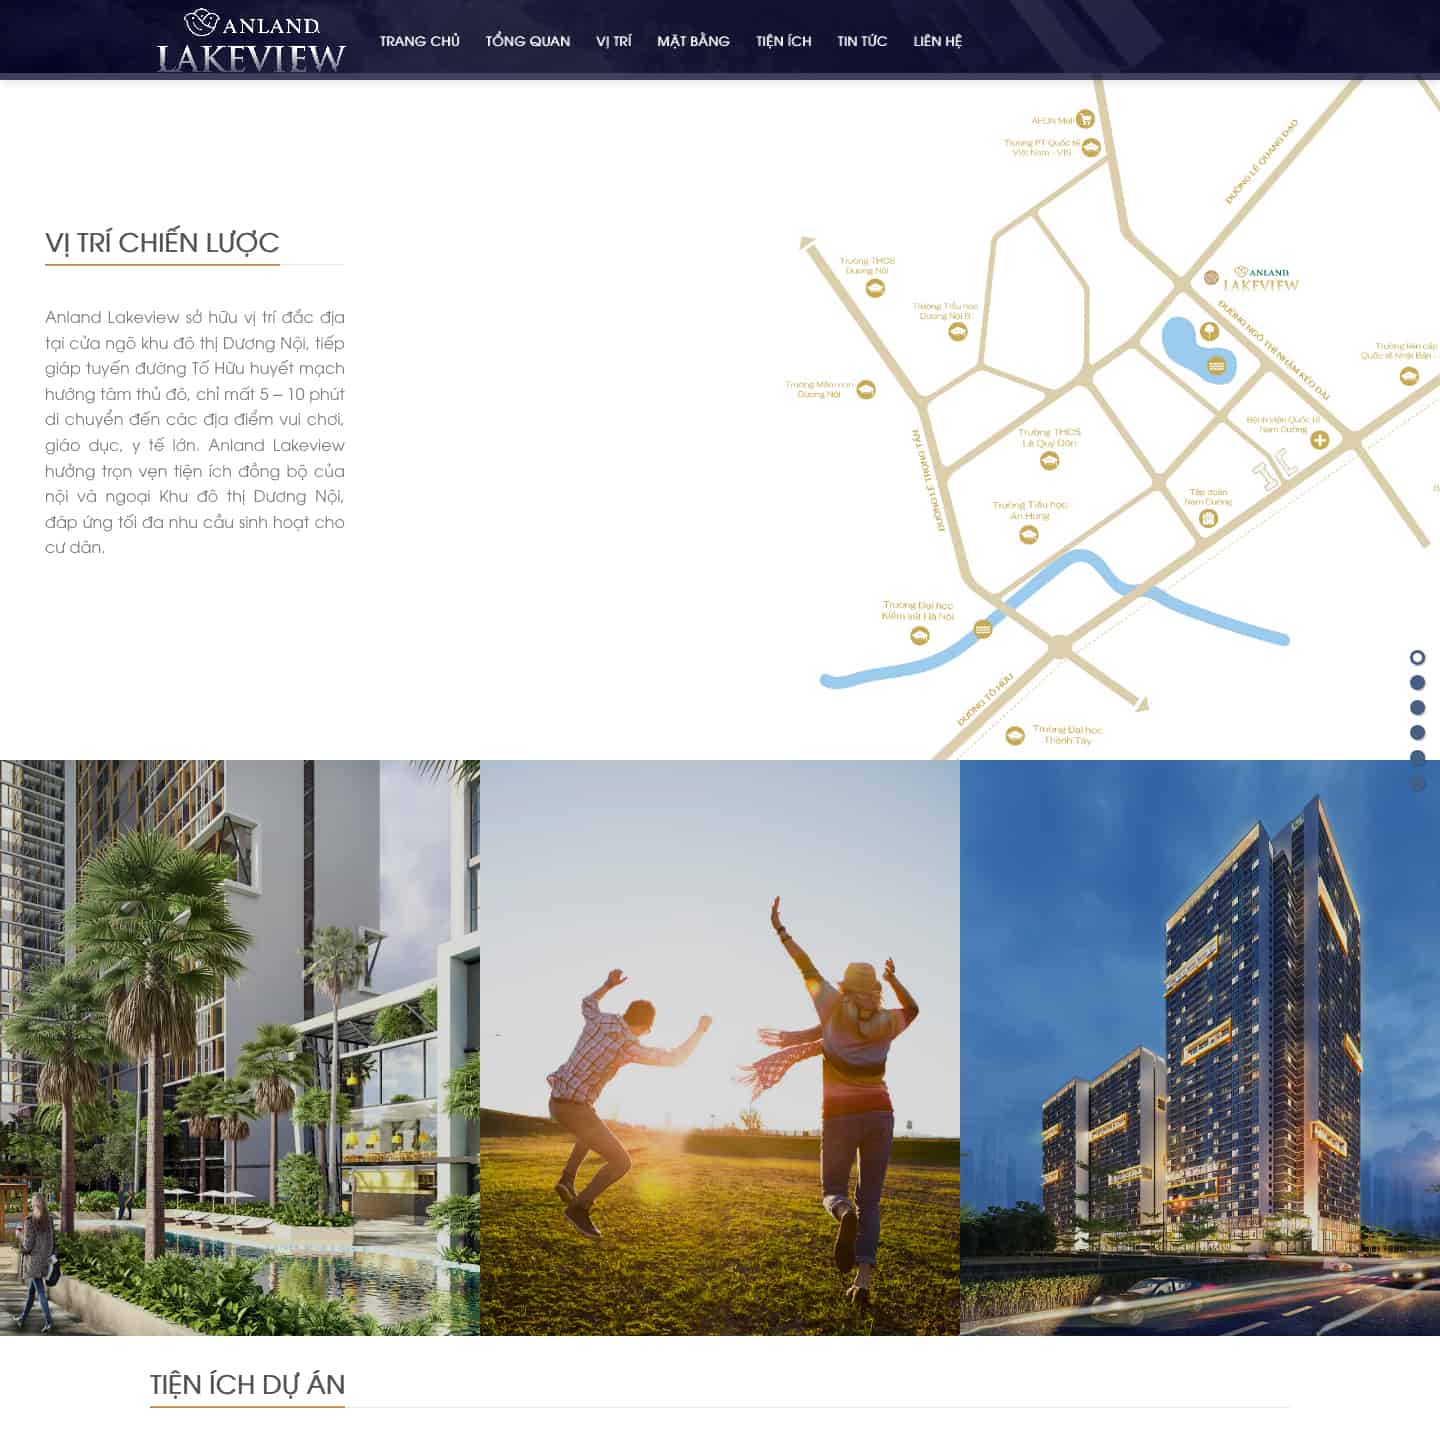 landing-page-bds-gioi-thieu-du-an-anland-lakeview-2